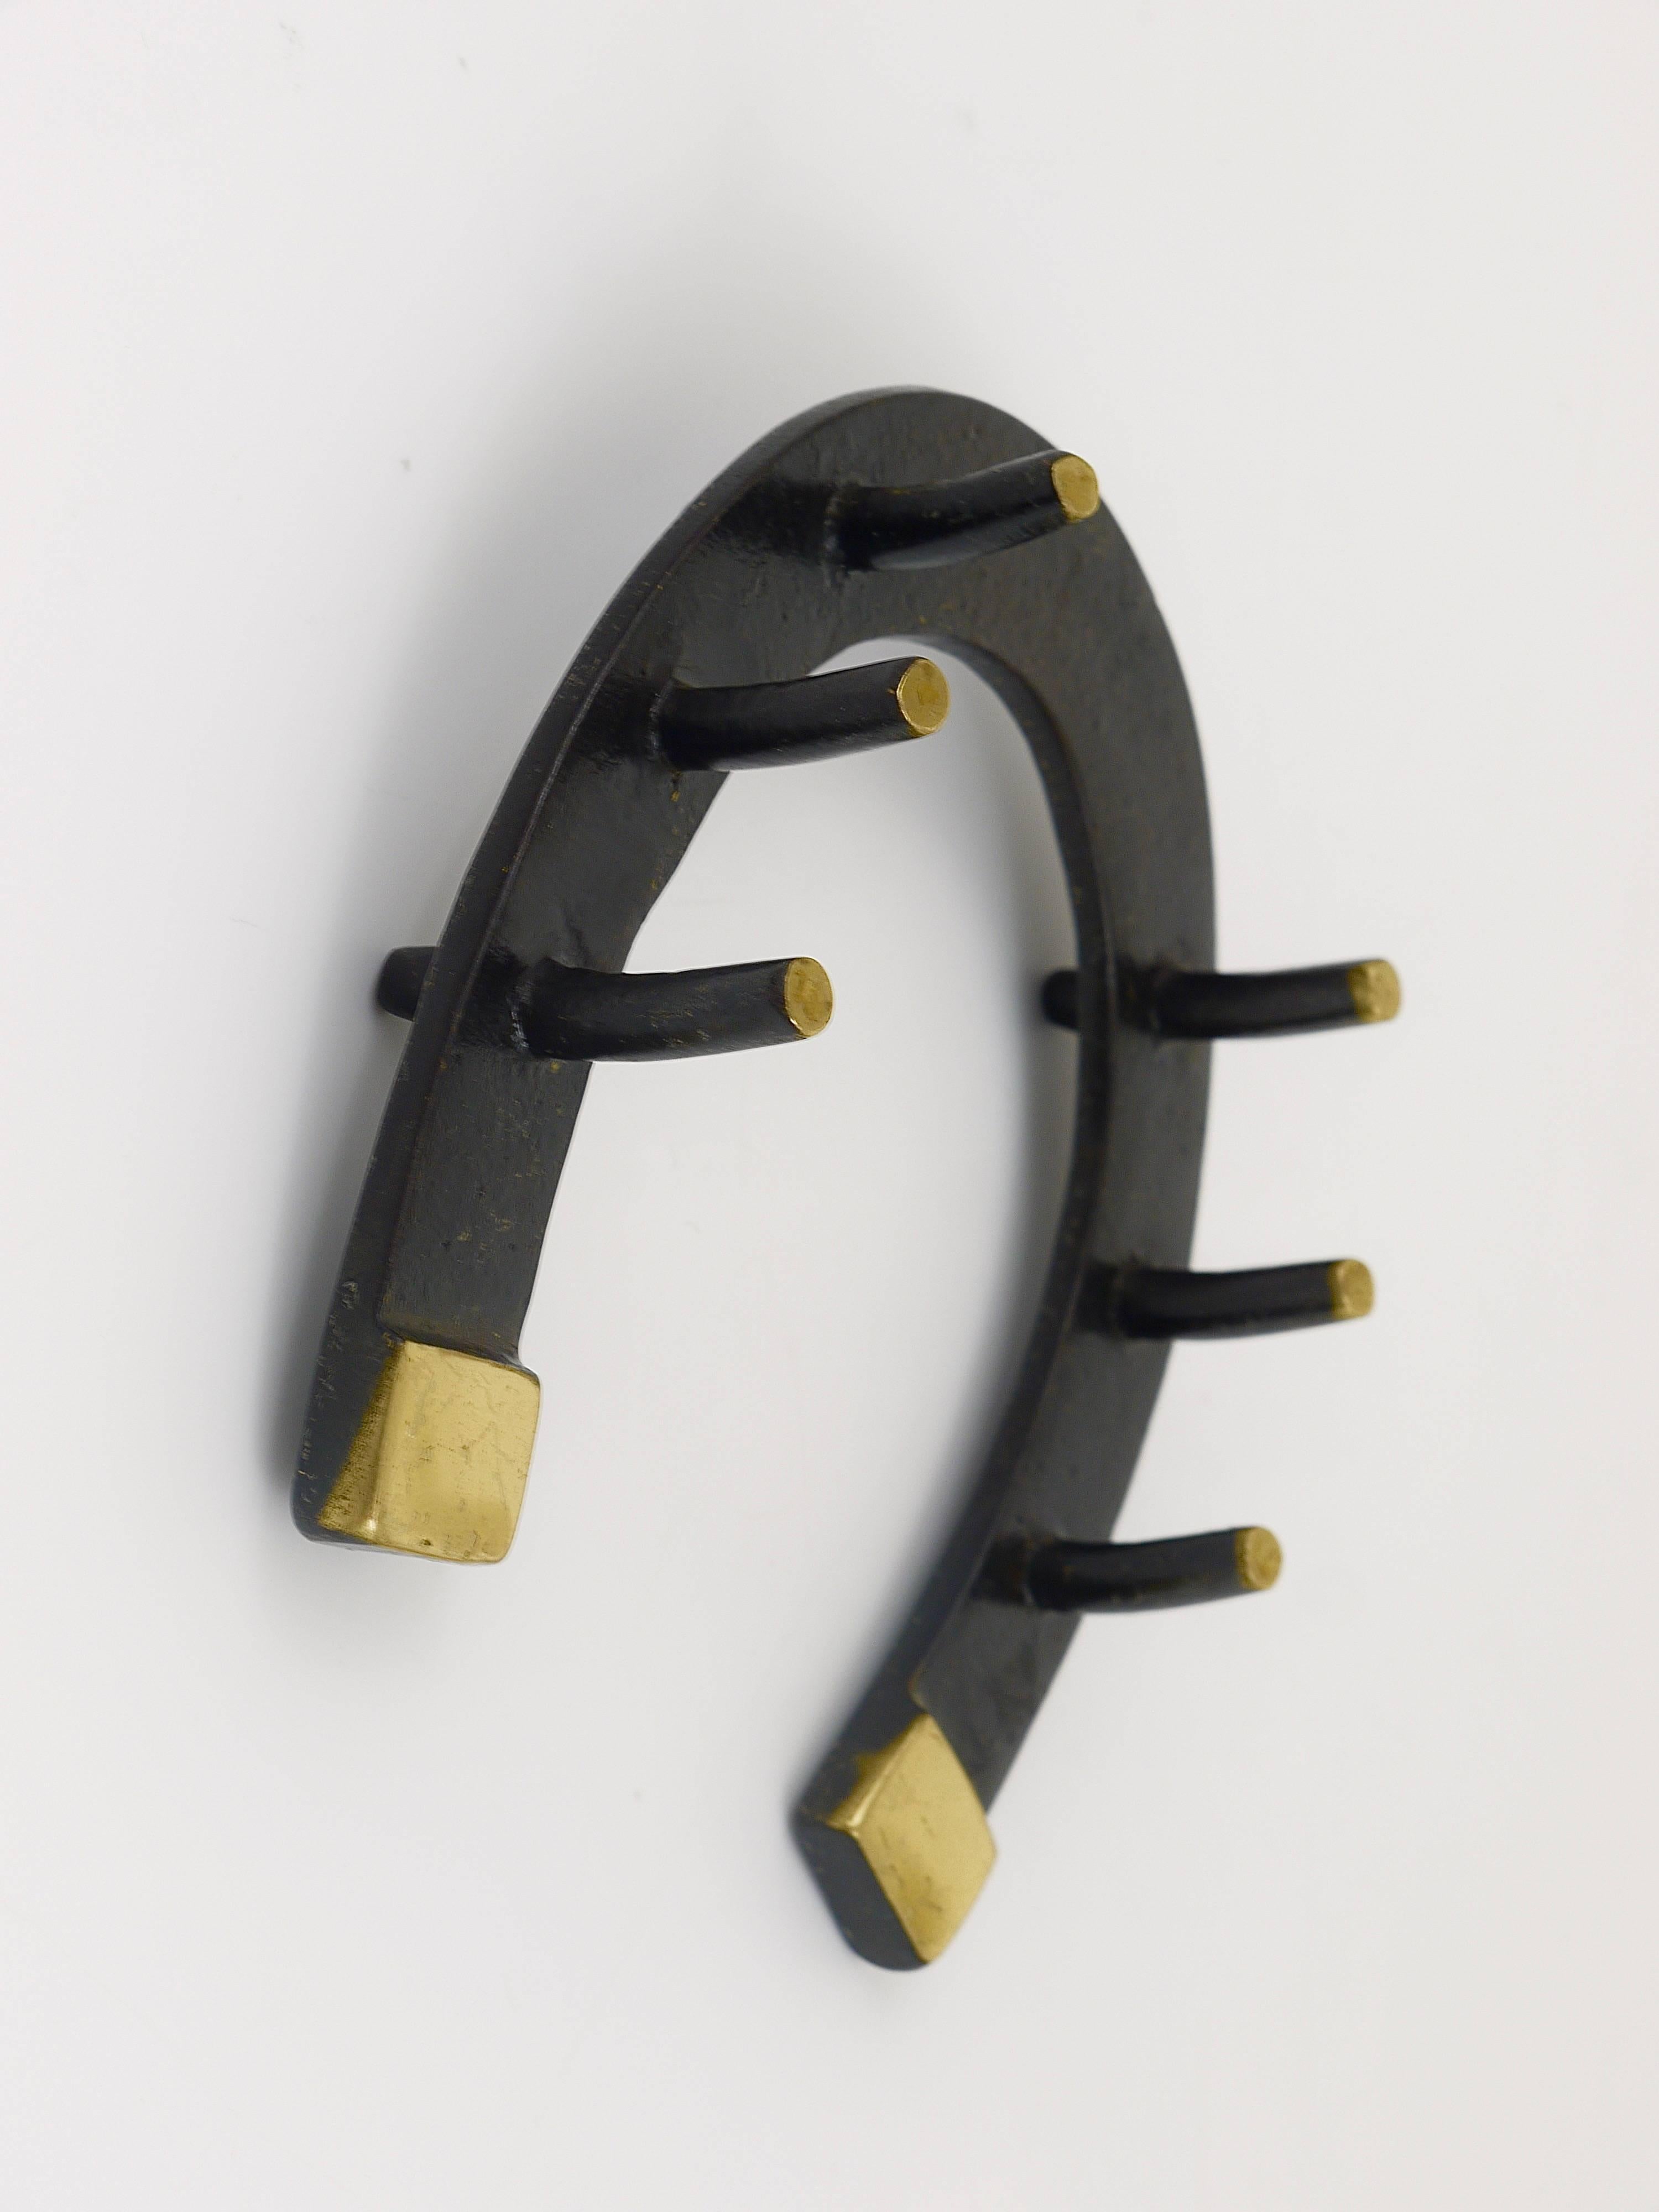 A charming Mid-Century key holder / key board, in the shape of a horse shoe. A beautiful design by Walter Bosse, executed by Baller Austria in the 1950s. Made of brass, in excellent condition. We offer more Walter Bosse brass object in our other